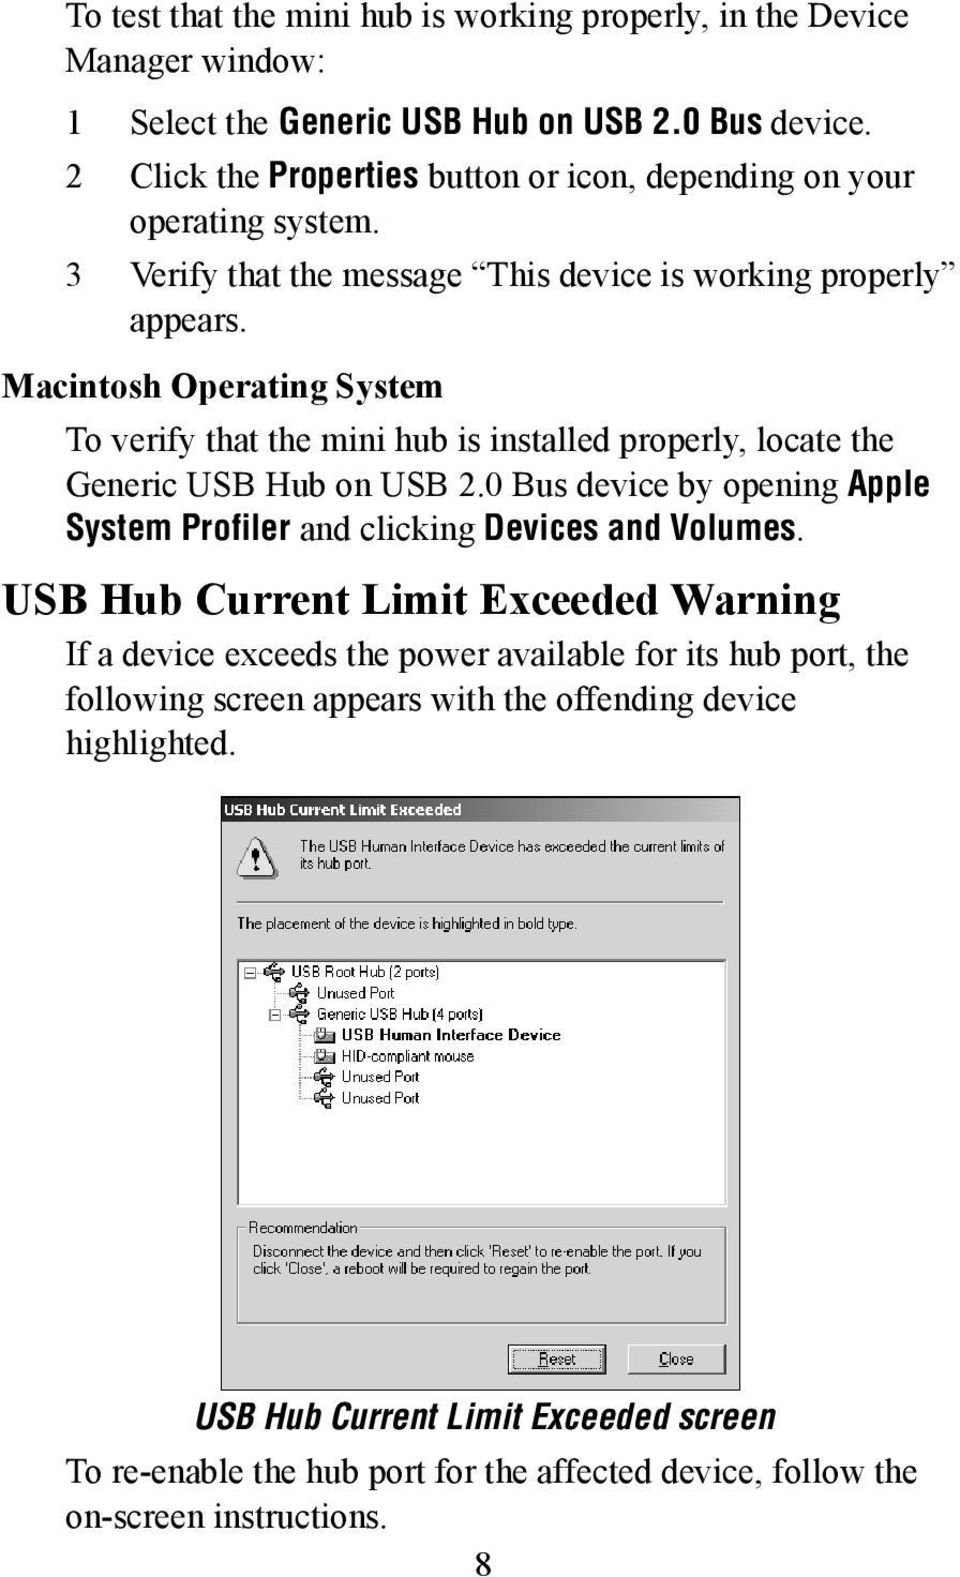 Macintosh Operating System To verify that the mini hub is installed properly, locate the Generic USB Hub on USB 2.